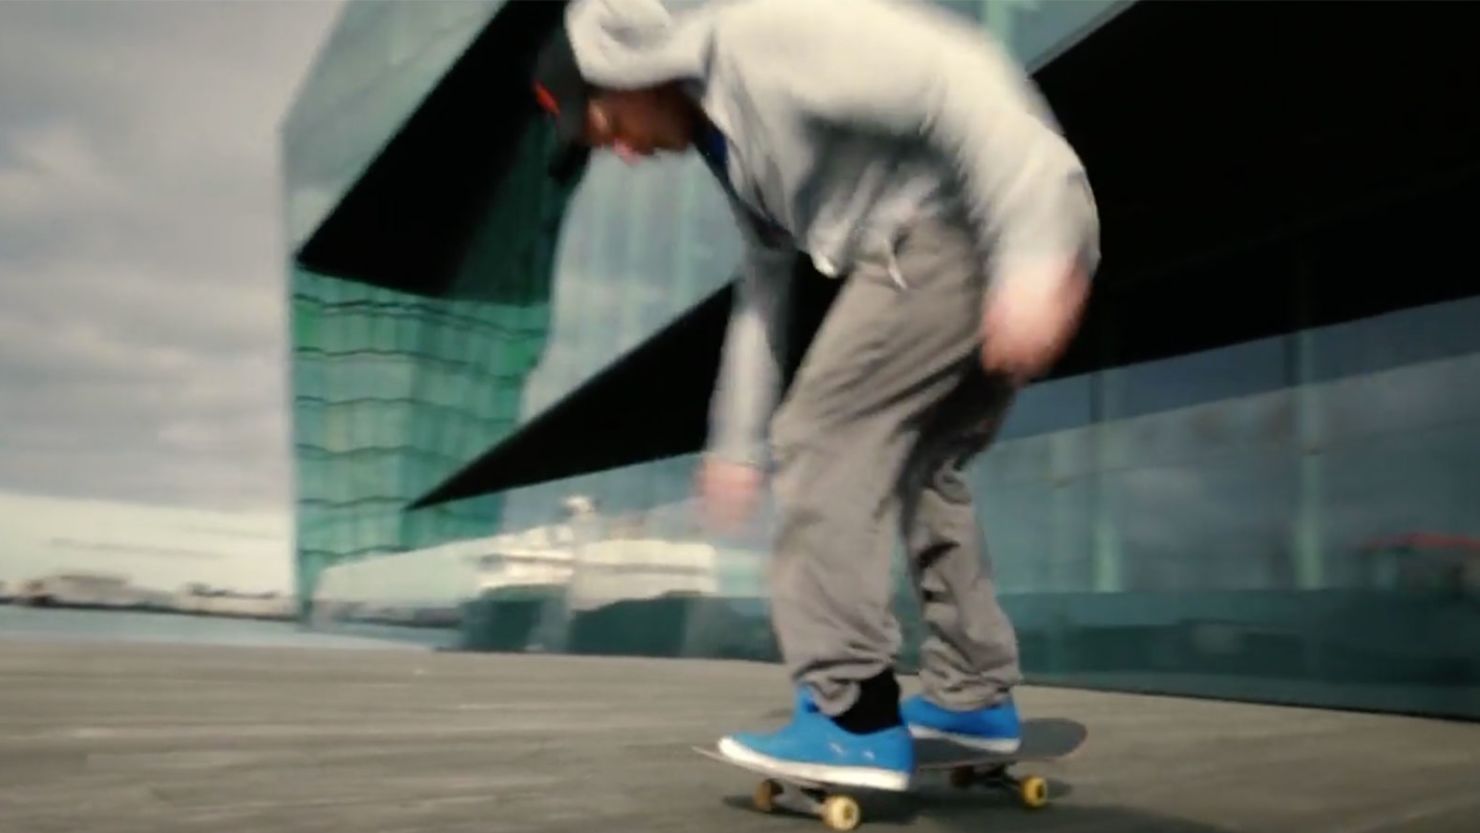 The video production company says at least the skateboarder was from Rhode Island.